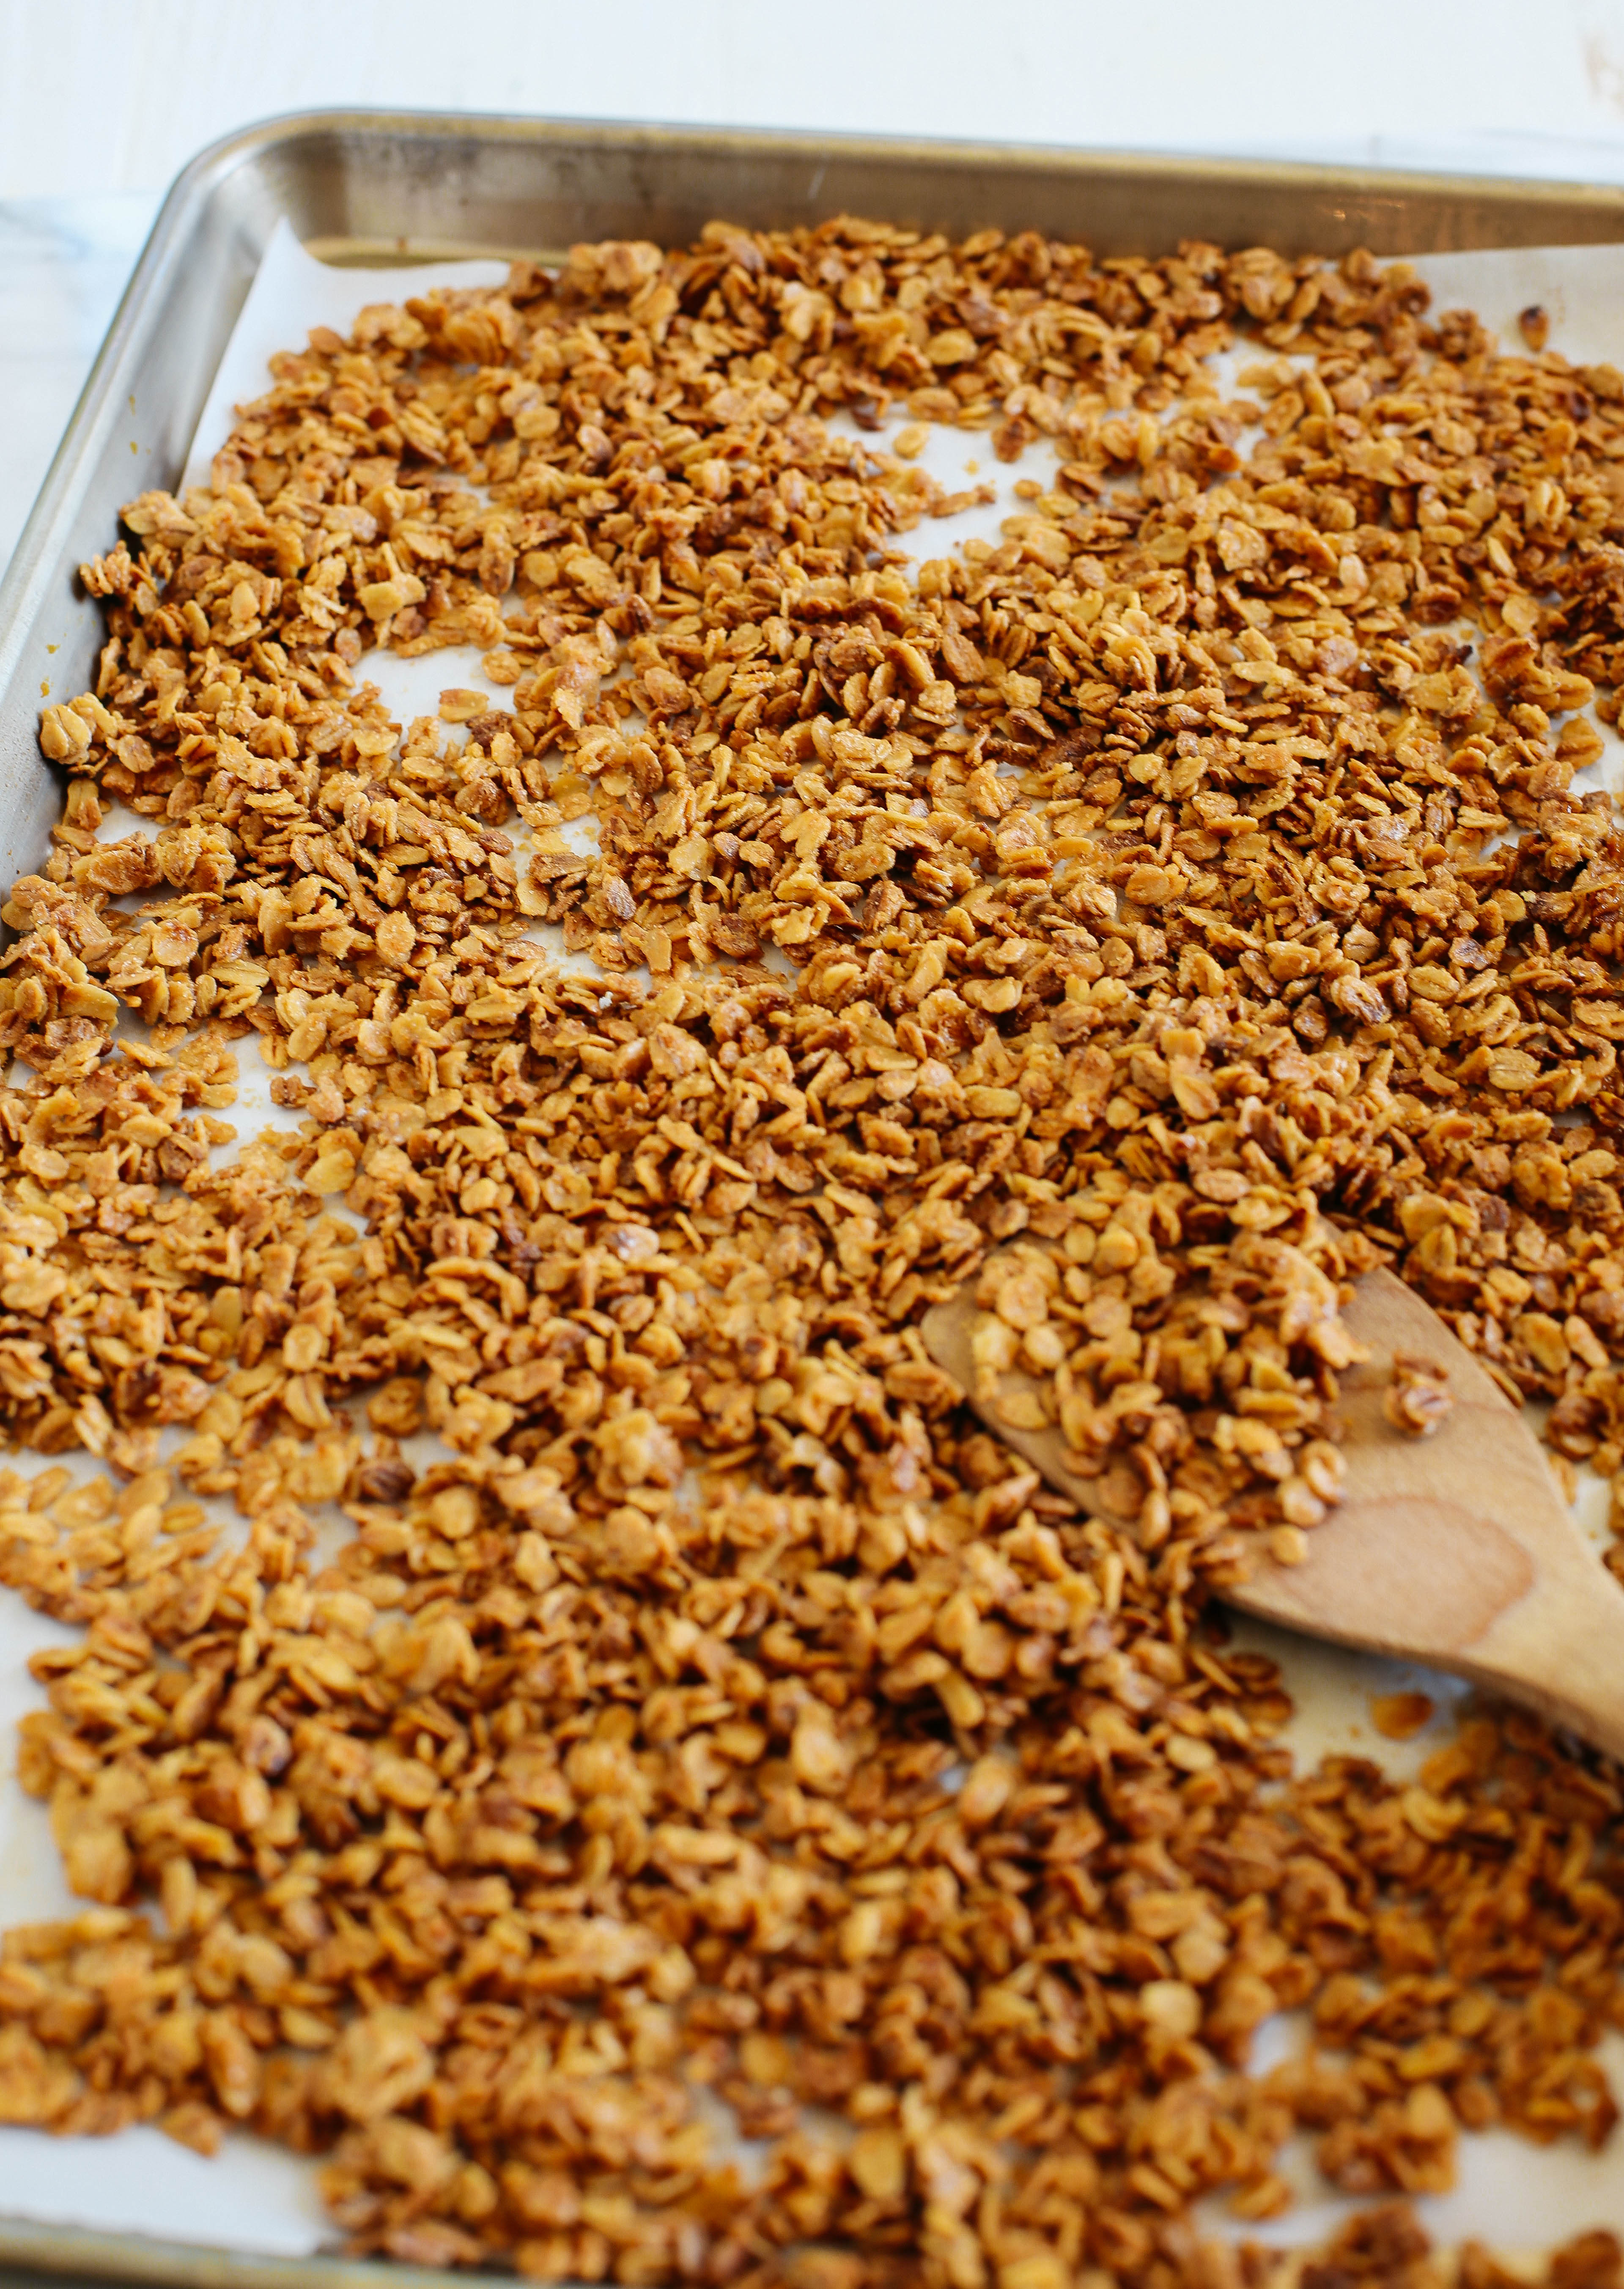 My favorite go-to granola recipe that is EASY to make and only requires three simple ingredients!  The perfect basic recipe that you can make all your own!